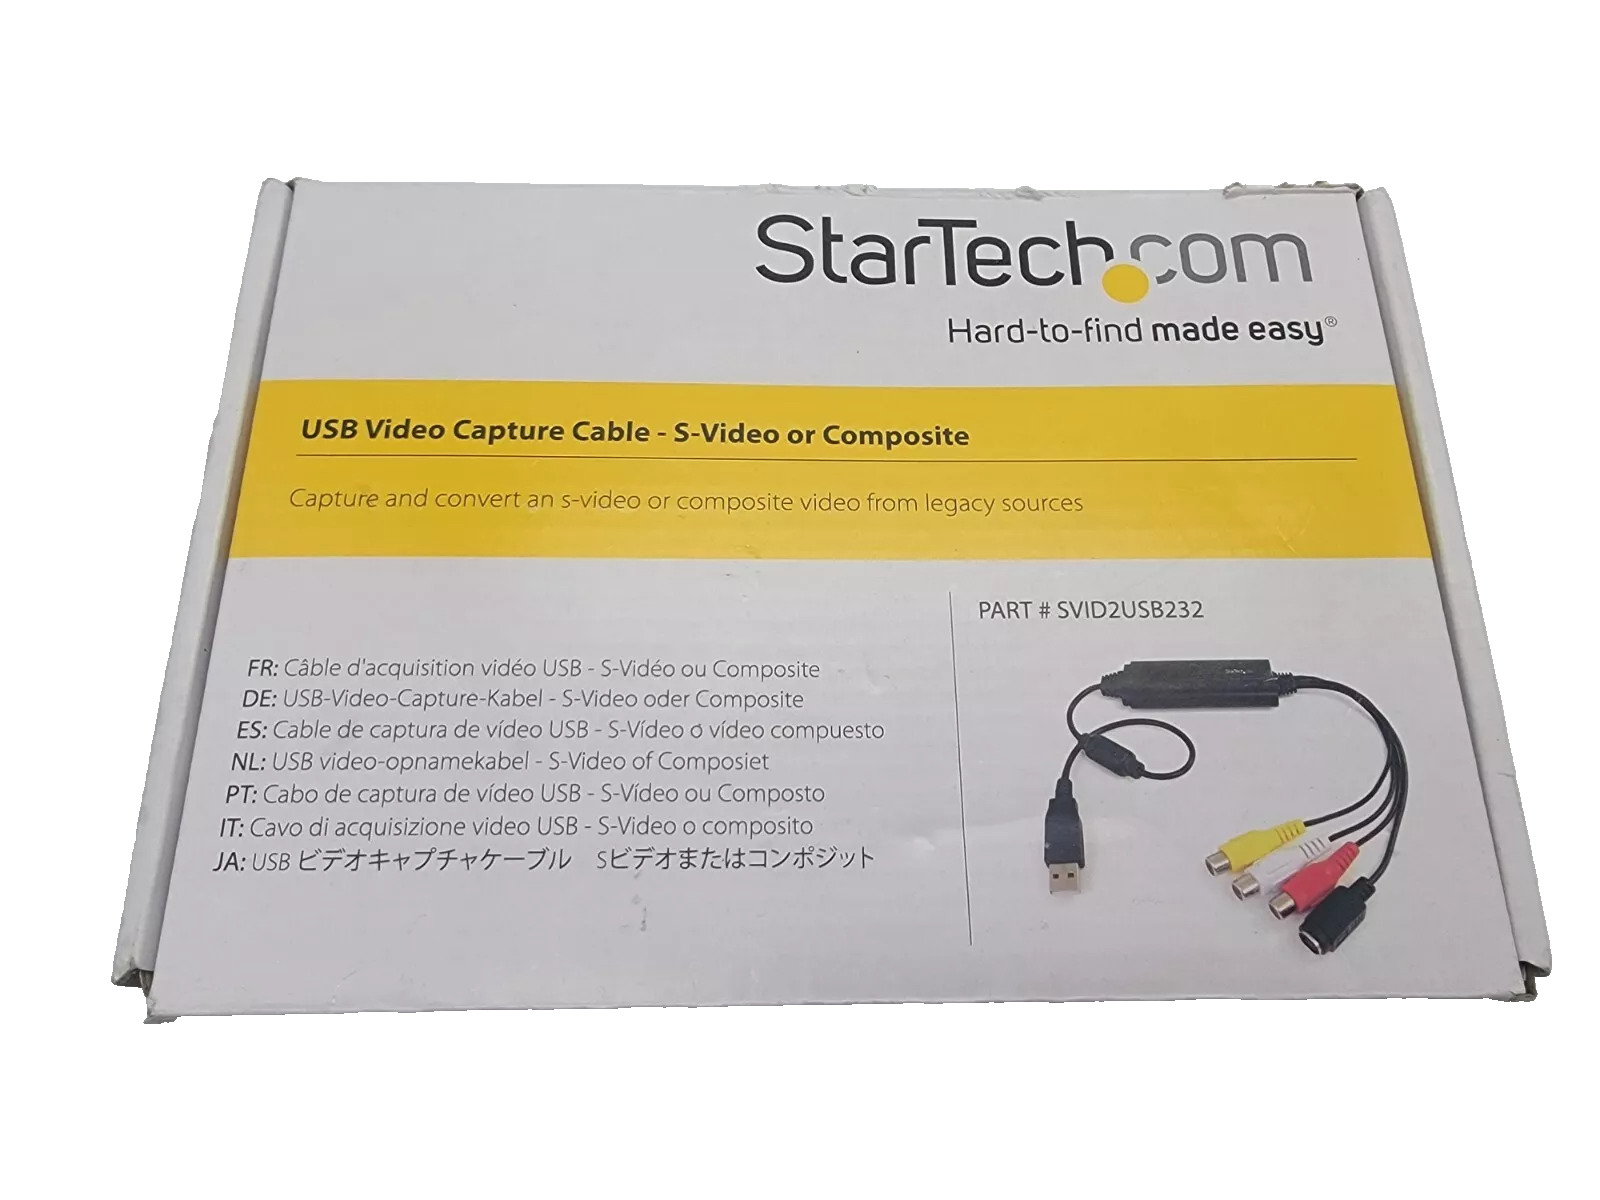 9 Startech SVID2USB232 USB Video Capture Adapter Cables S-Video Composite to USB